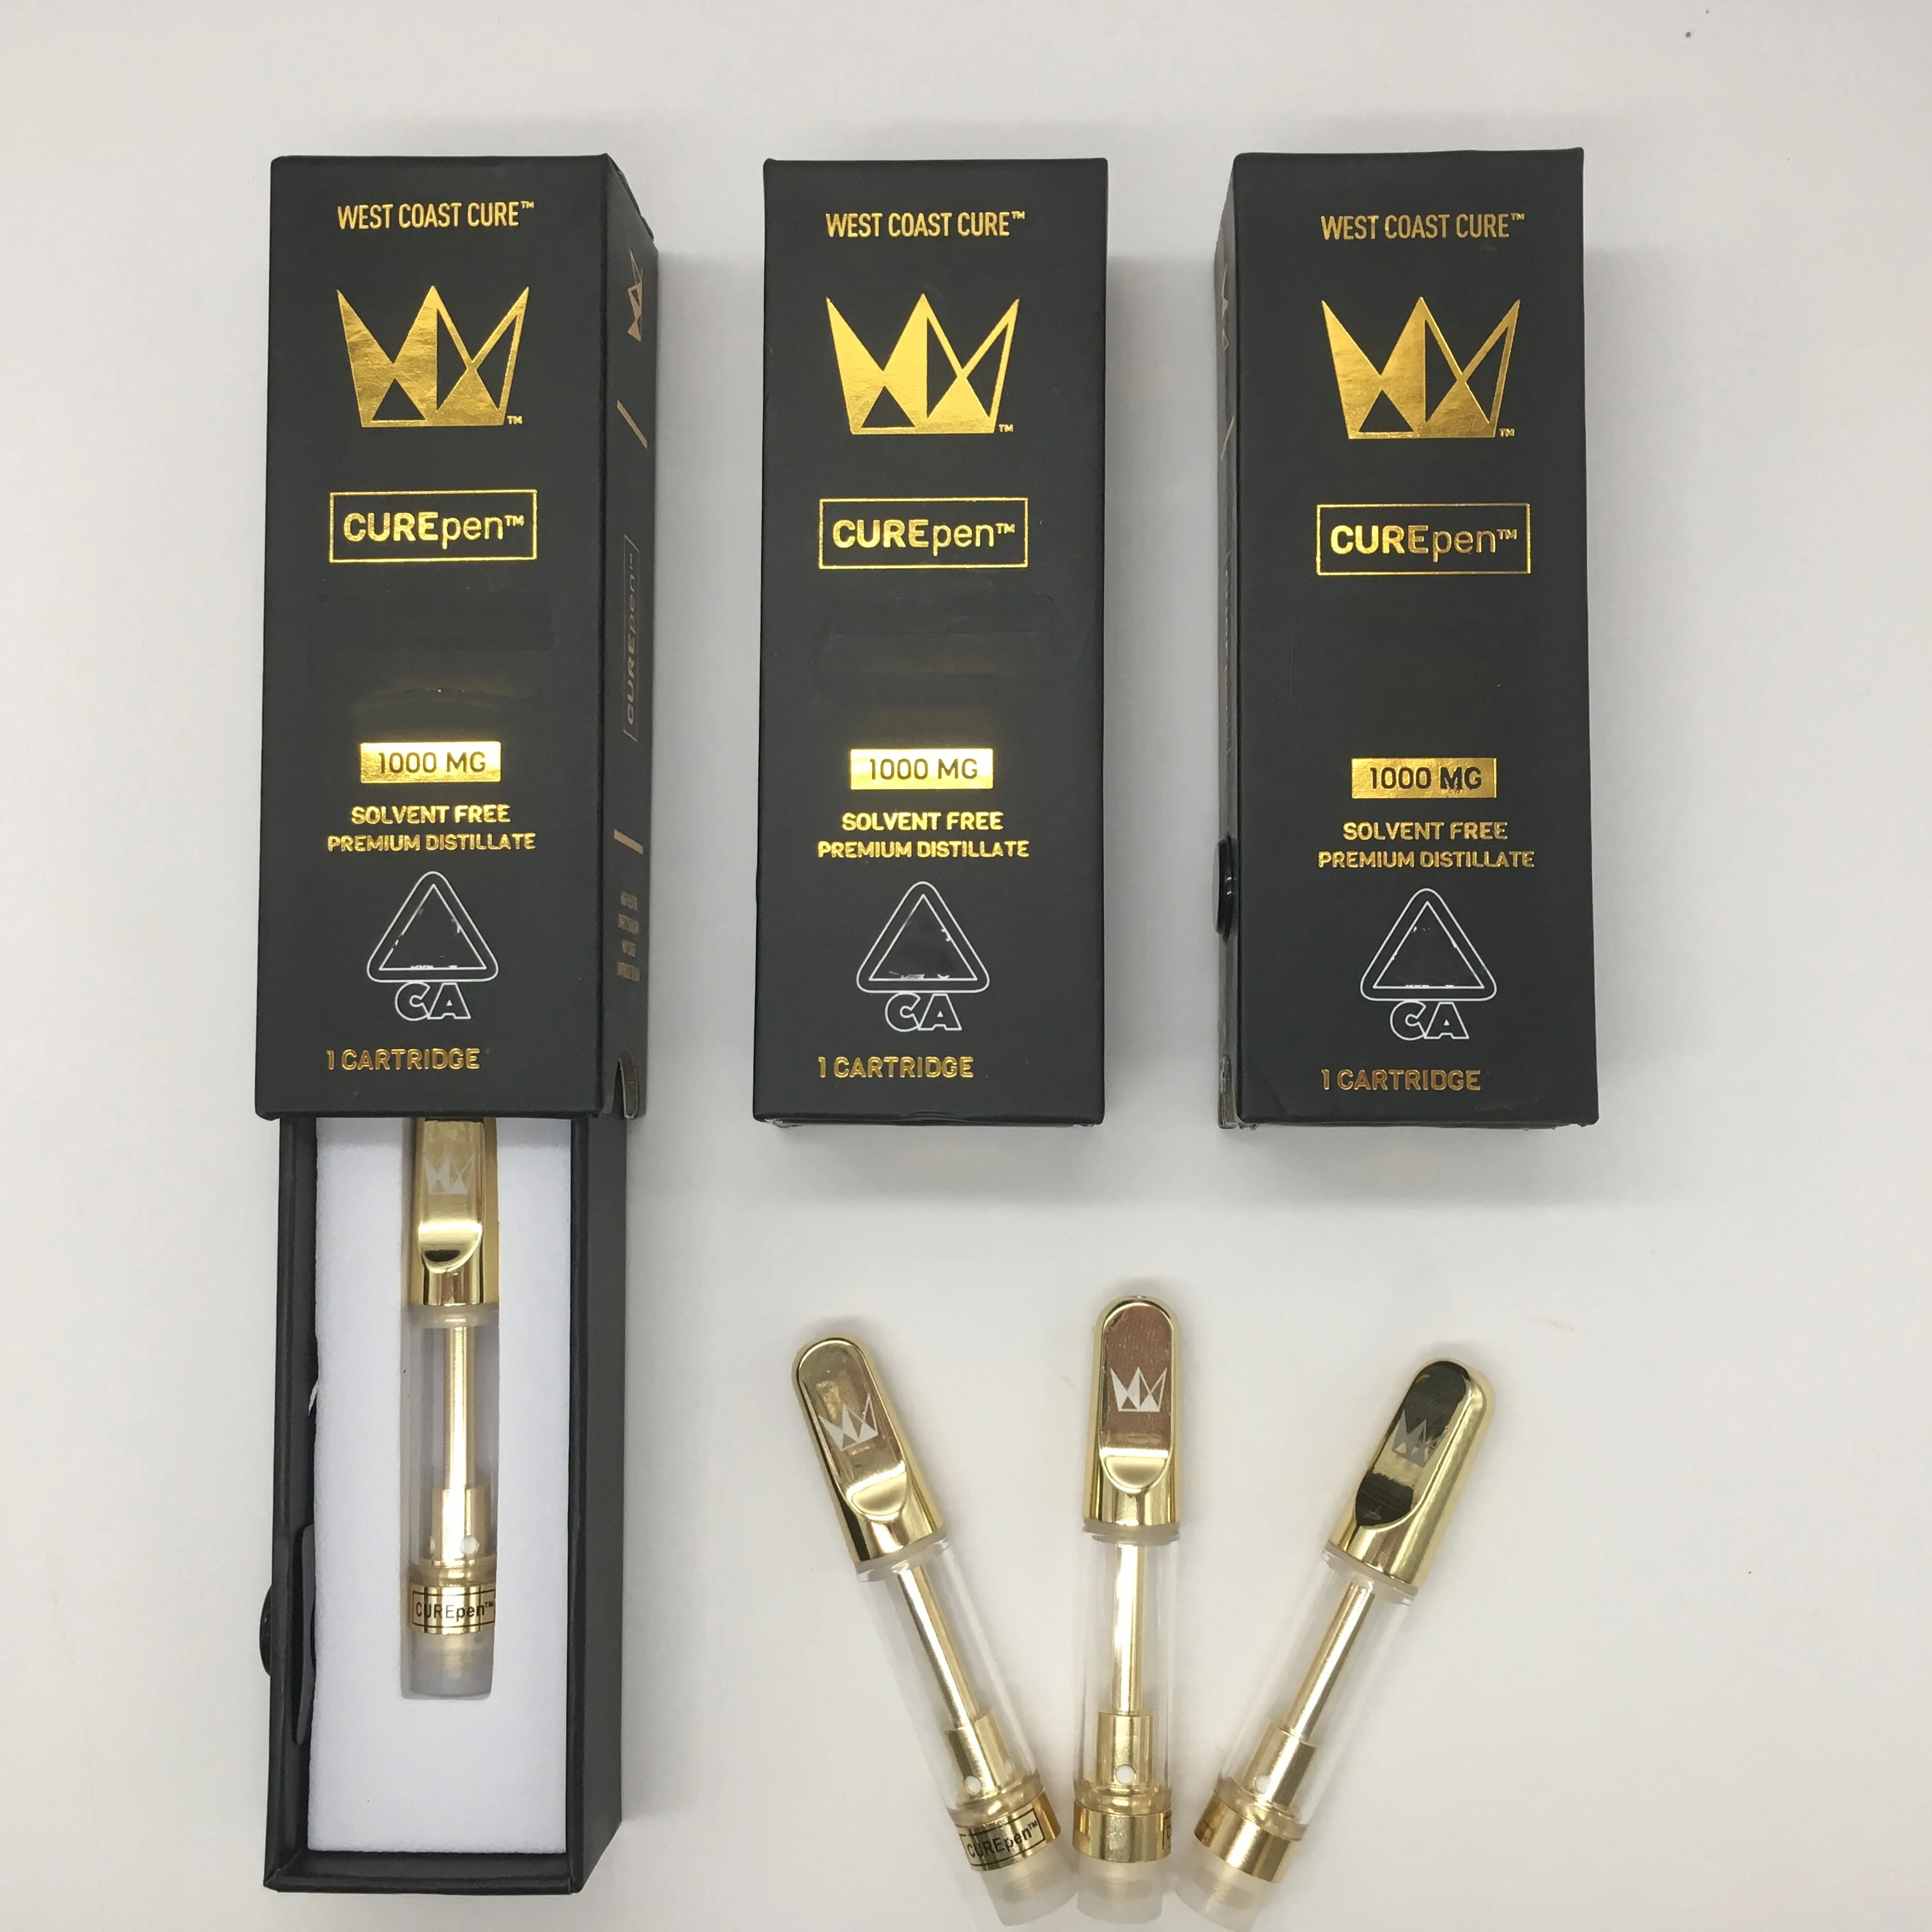 

New Arrival West Coast Cure Vape Carts 510 Thread Thick Oil Cure Pen Vape Cartridges Metal Mouthtip Atomizer in stock